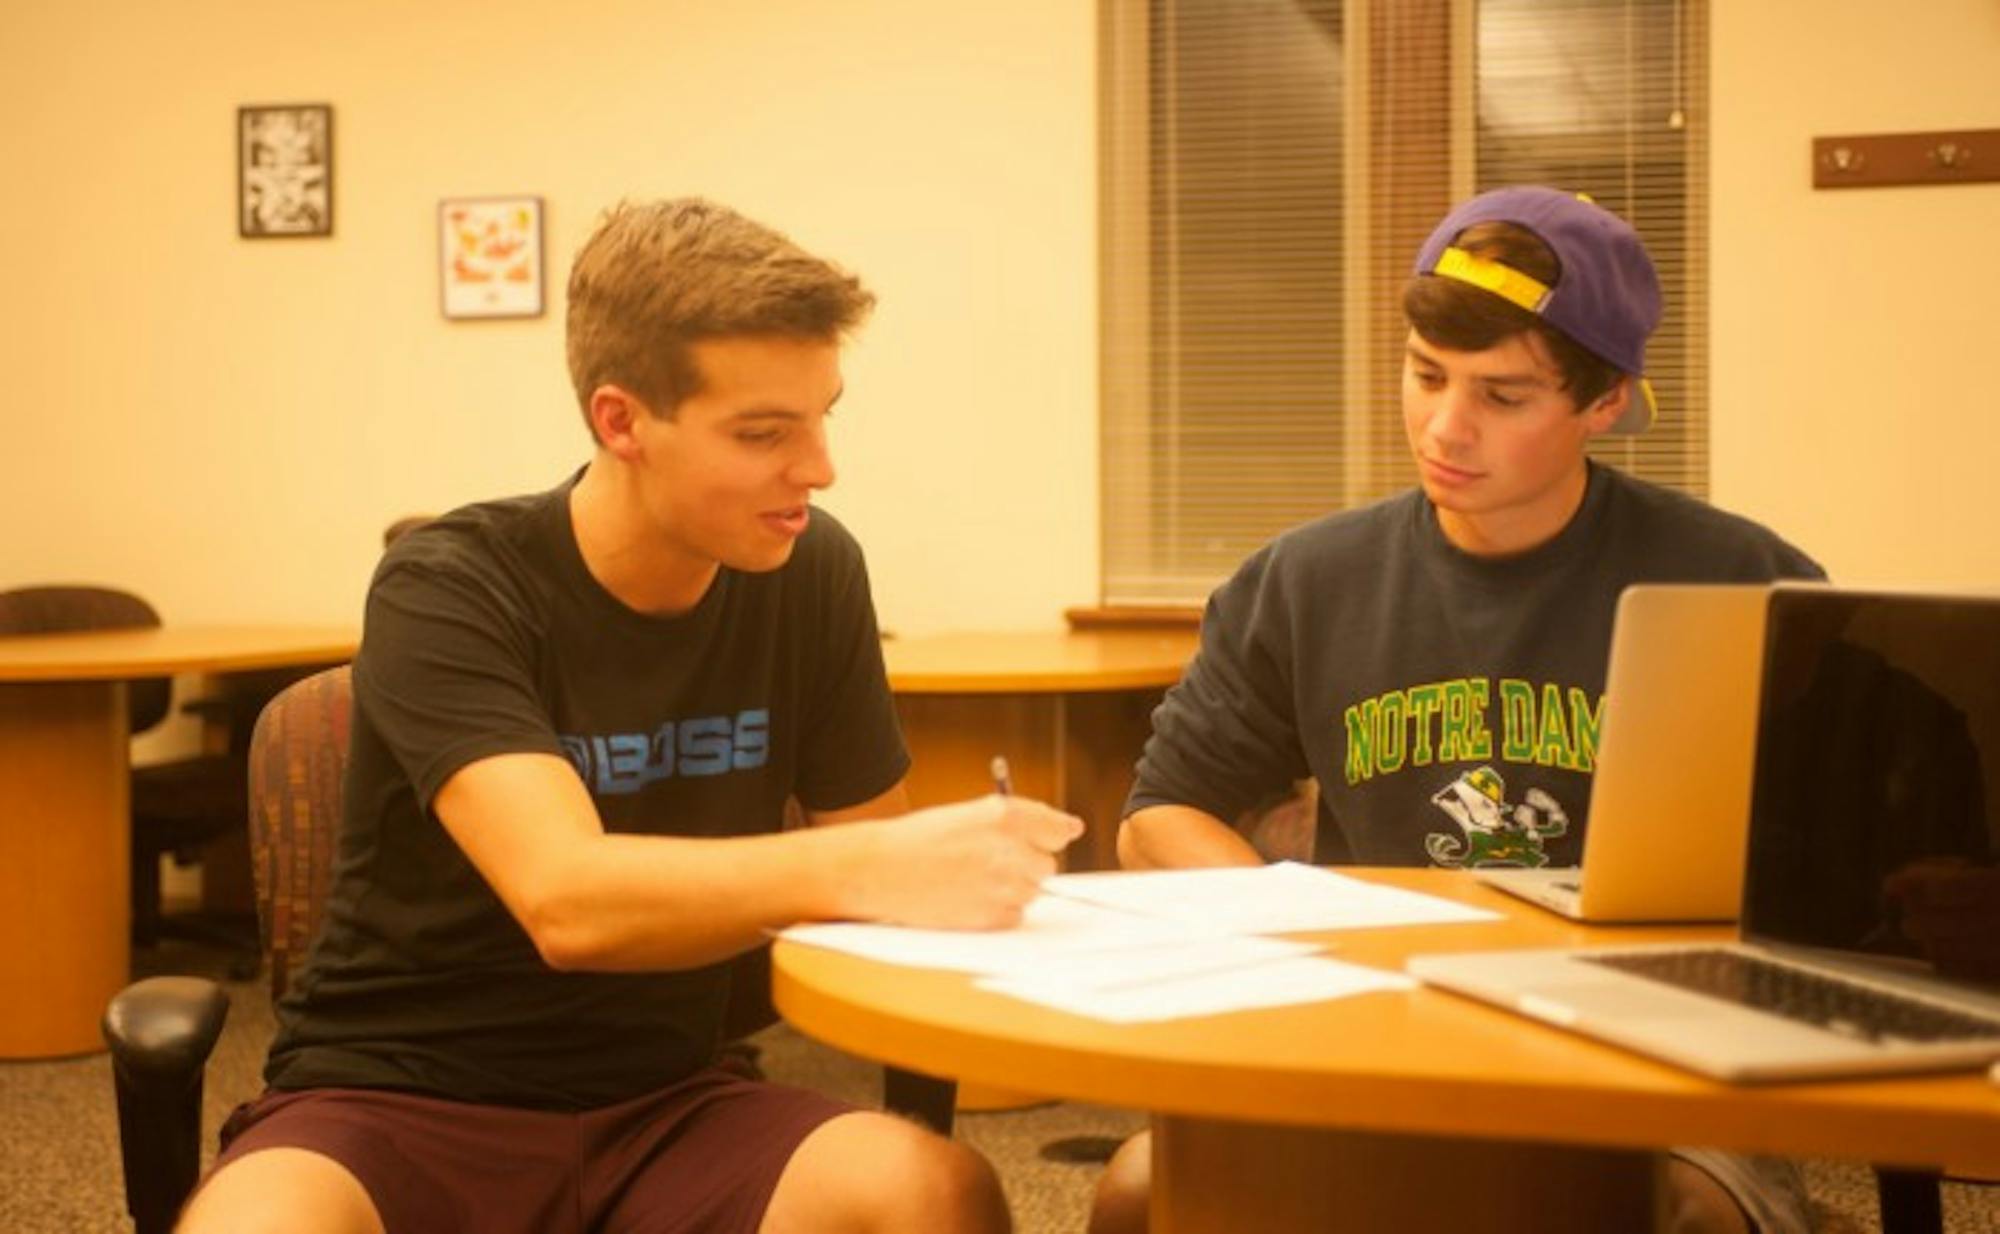 A student consults with a tutor in the Coleman-Morse location of the Writing Center.